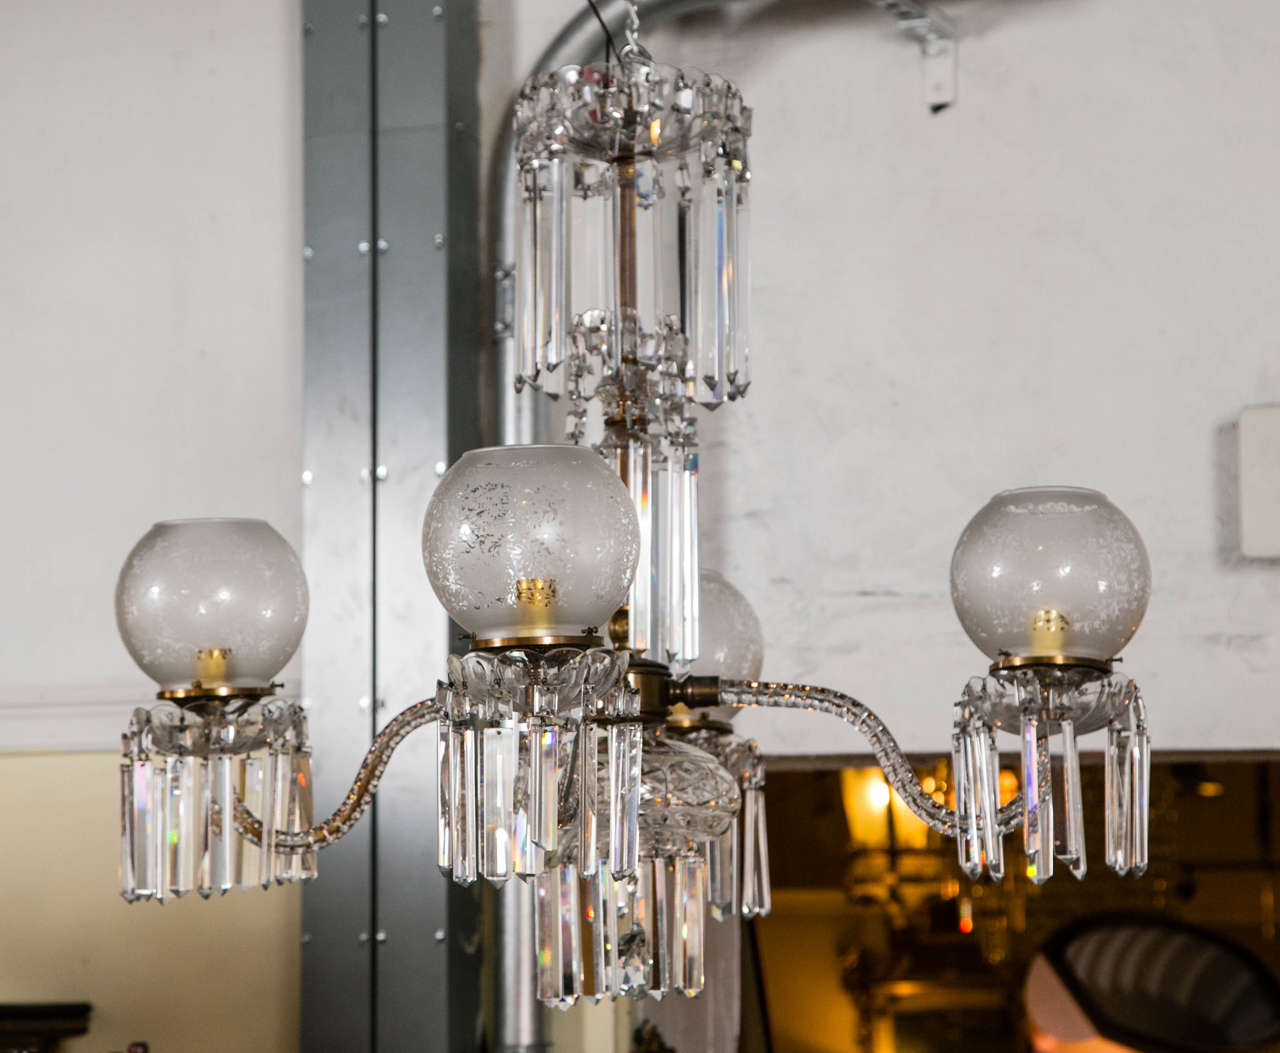 A Victorian crystal and globe four-arm chandelier. Long hanging crystal prisms and etched glass globes hi light this late 19th century Victorian chandelier. The central brass crystal covered support having four lighted arms each with large crystals